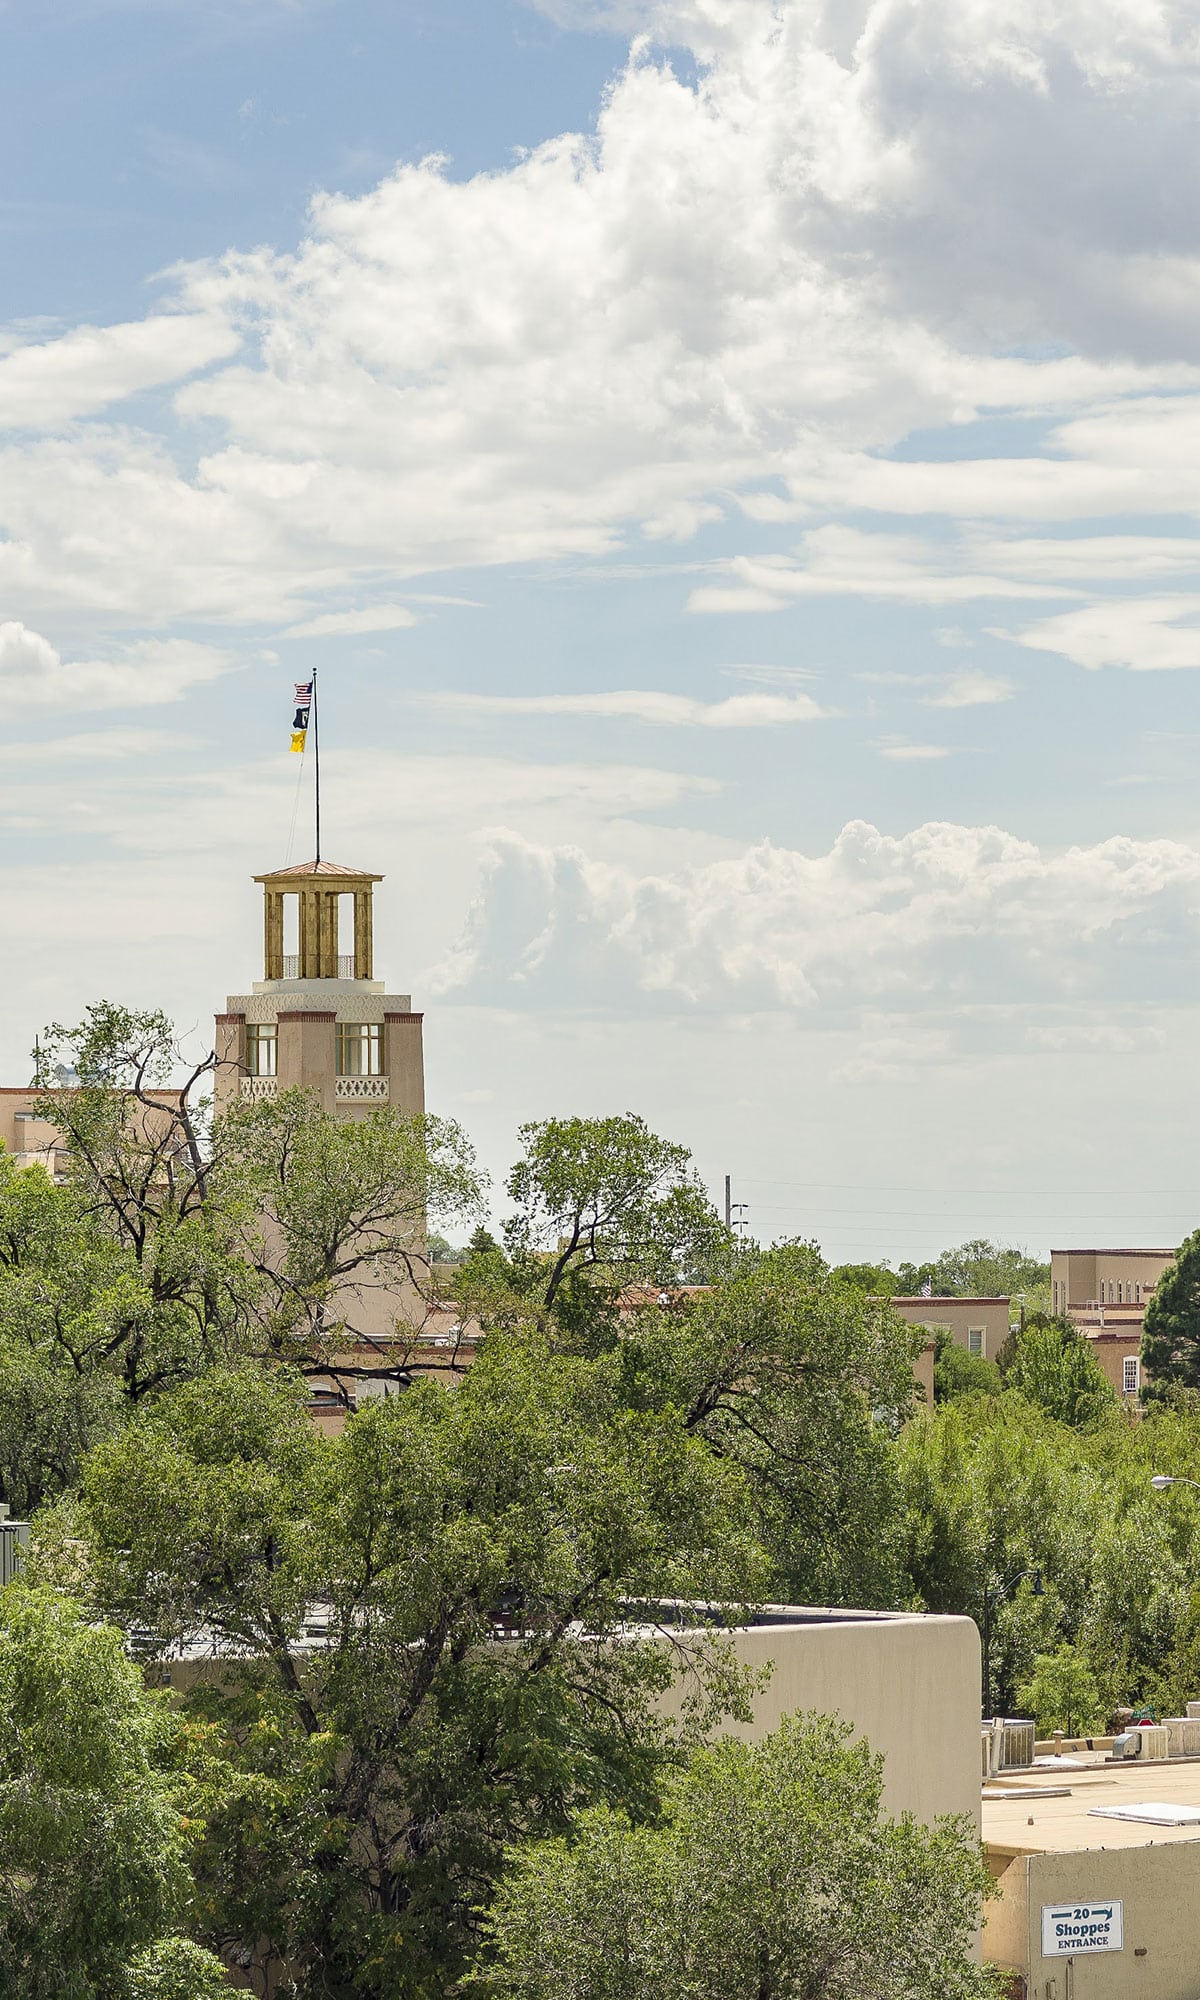 Flags fly from the top flag pole of the Bataan Memorial building in downtown Santa Fe, New Mexico.